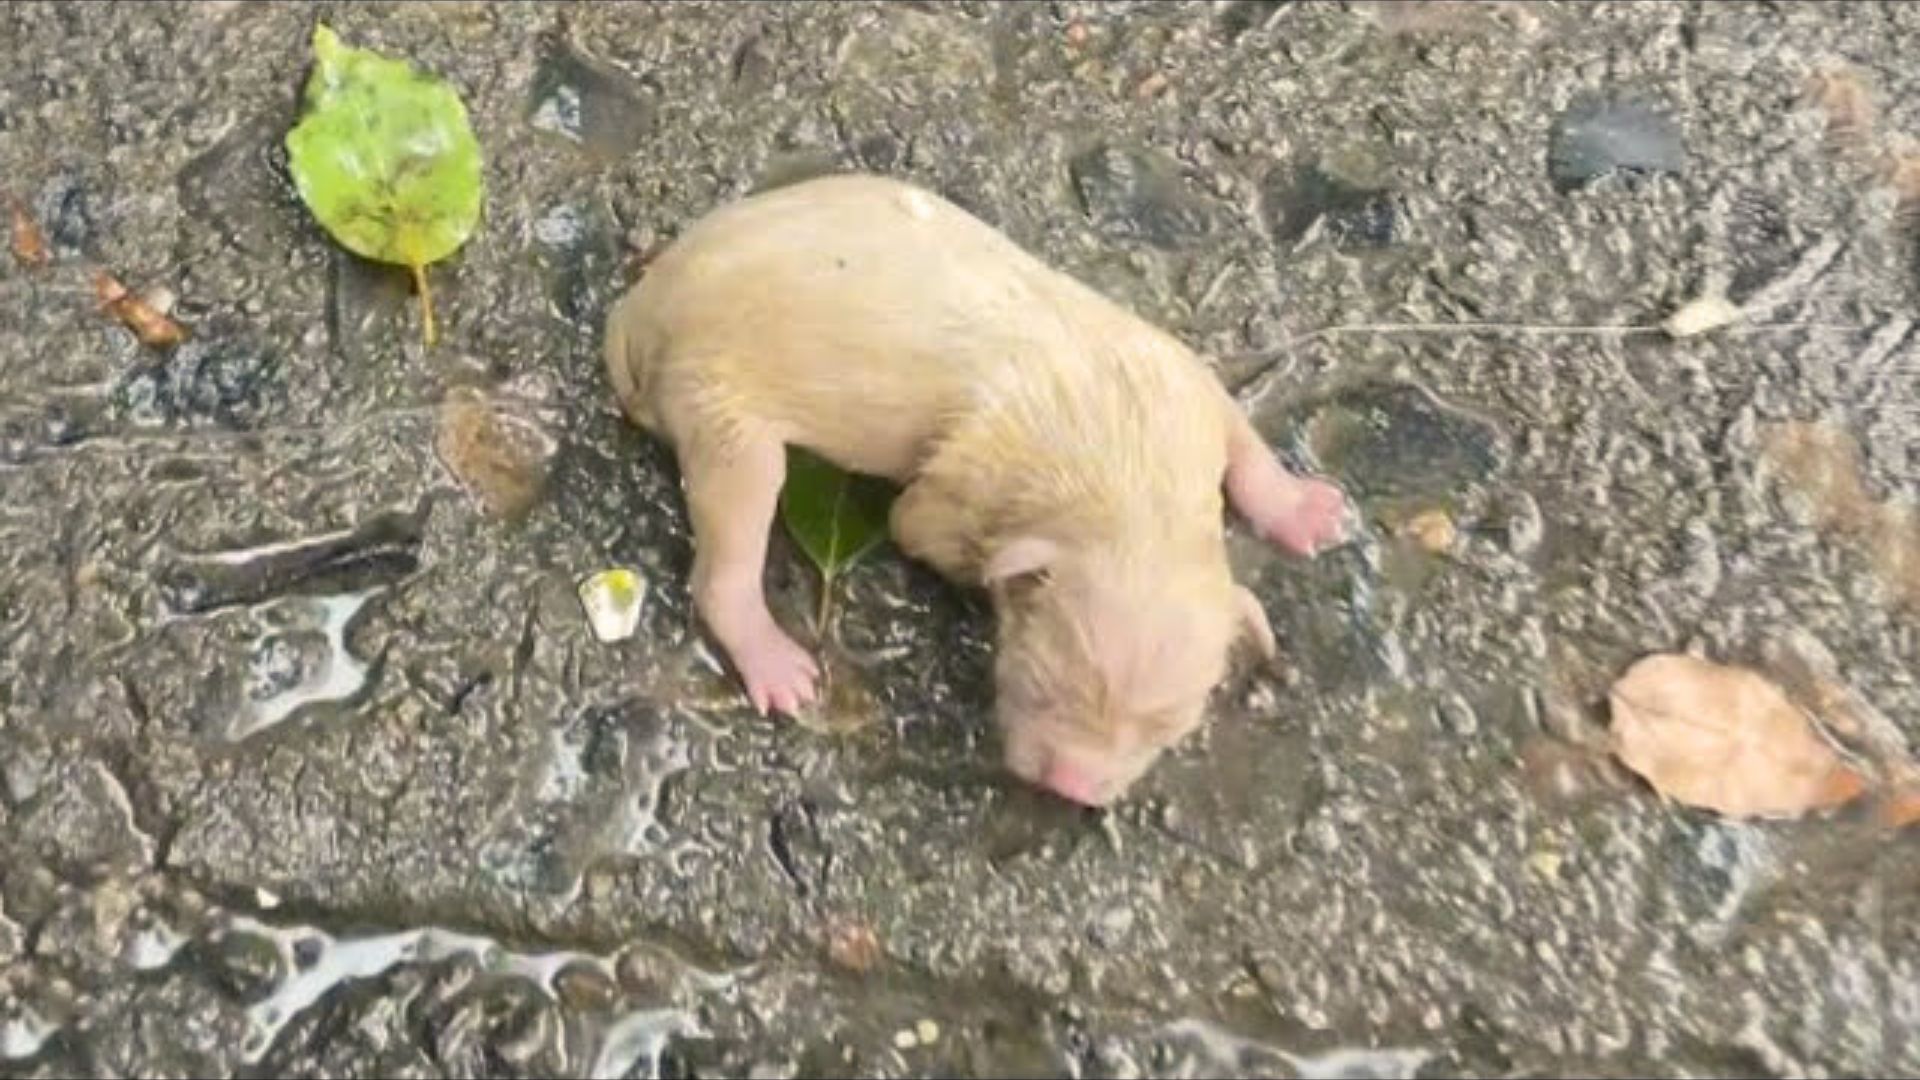 Rescuers Were Surprised To Find A Newborn Puppy In Heavy Rain So They Rushed To Help